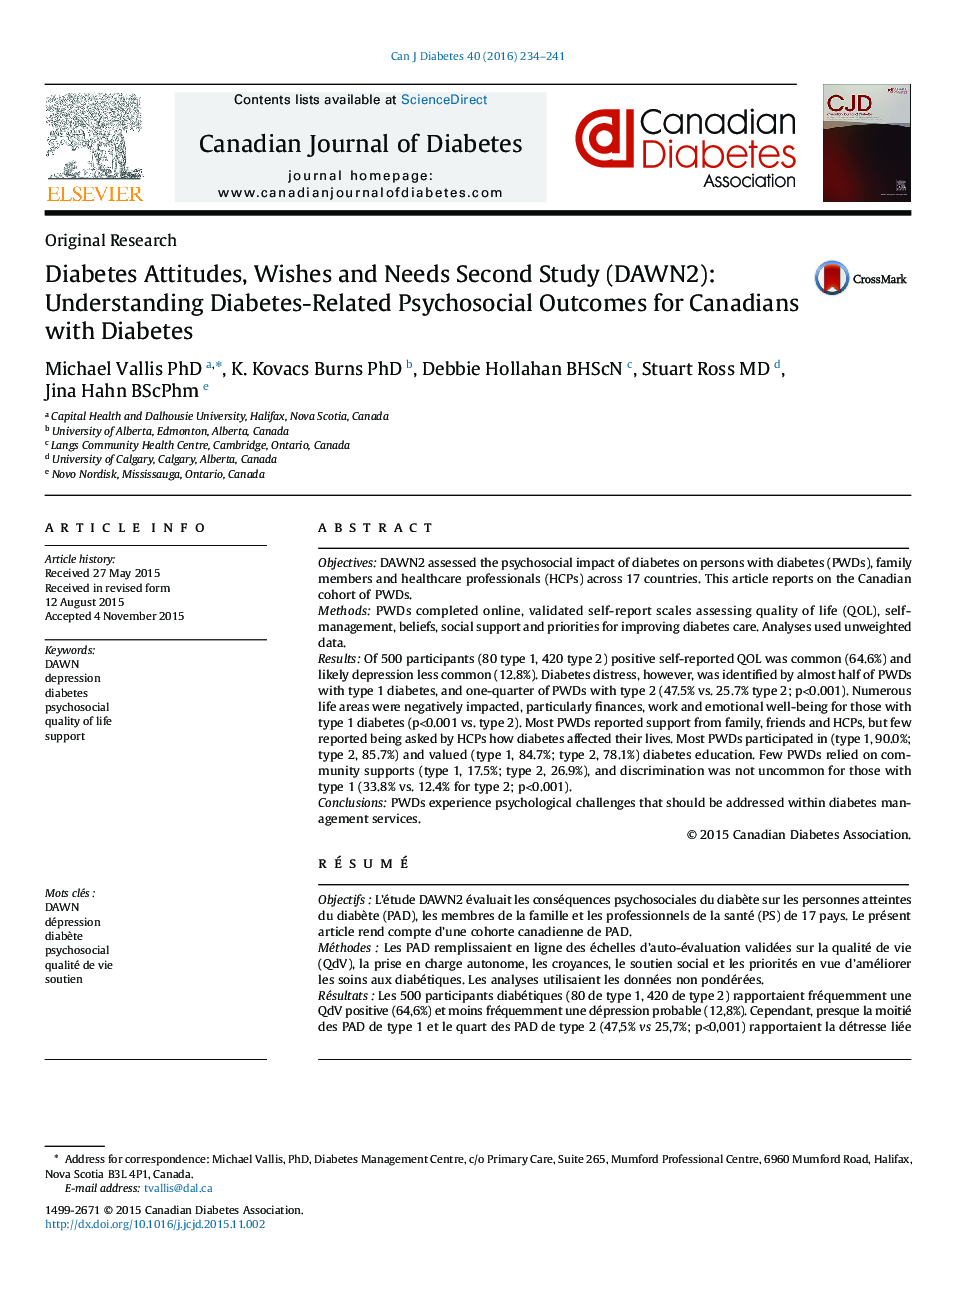 Original ResearchDiabetes Attitudes, Wishes and Needs Second Study (DAWN2): Understanding Diabetes-Related Psychosocial Outcomes for Canadians with Diabetes